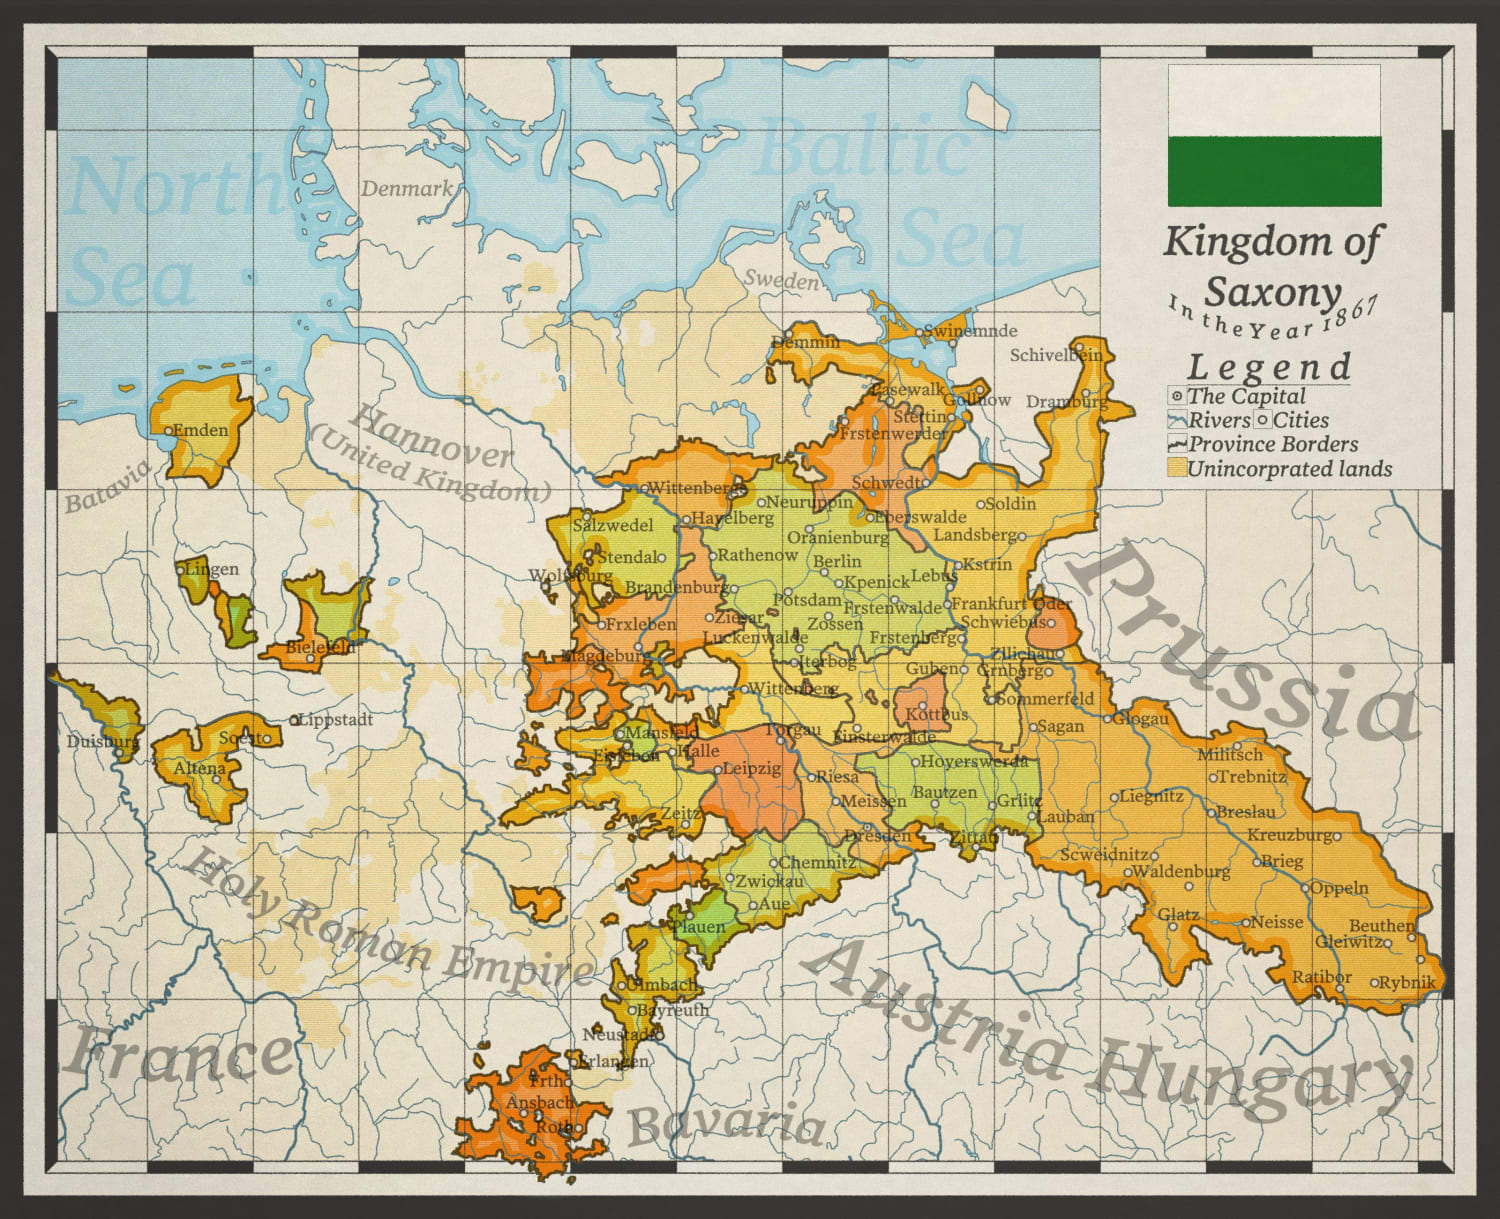 The Kingdom of Saxony in the year 1867│Greater big Saxony.